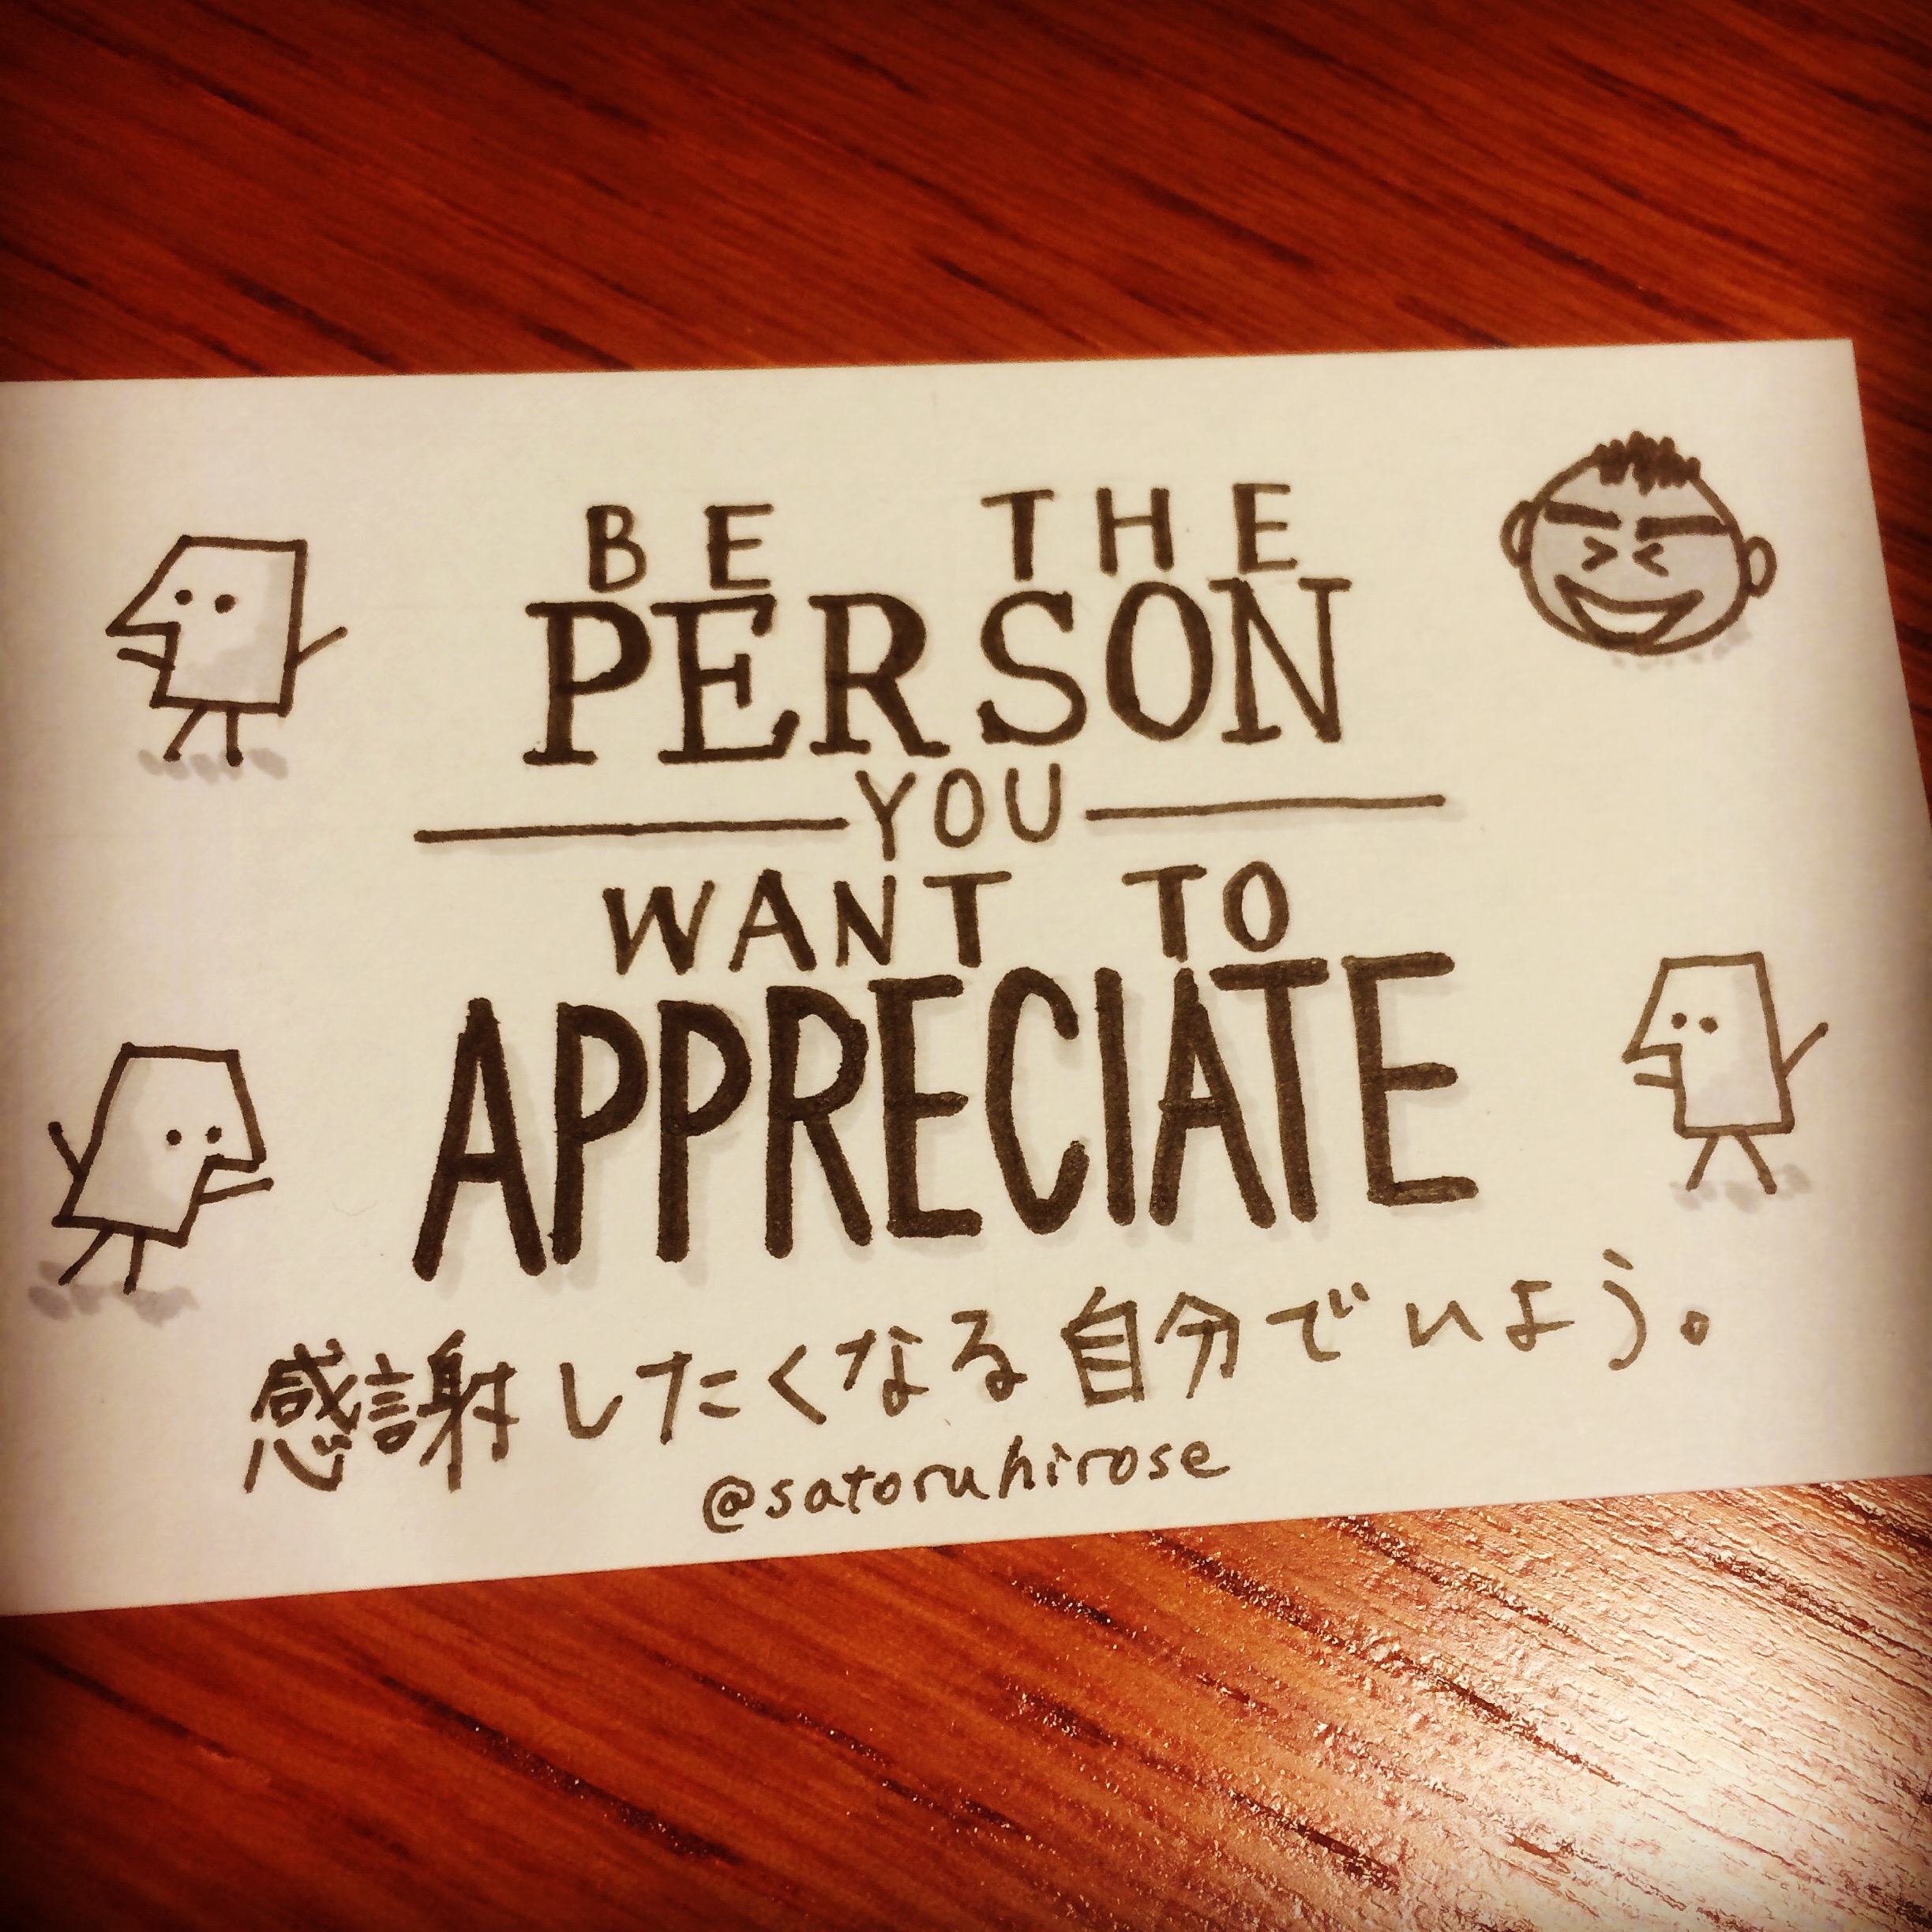 Be the person you want to appreciate.